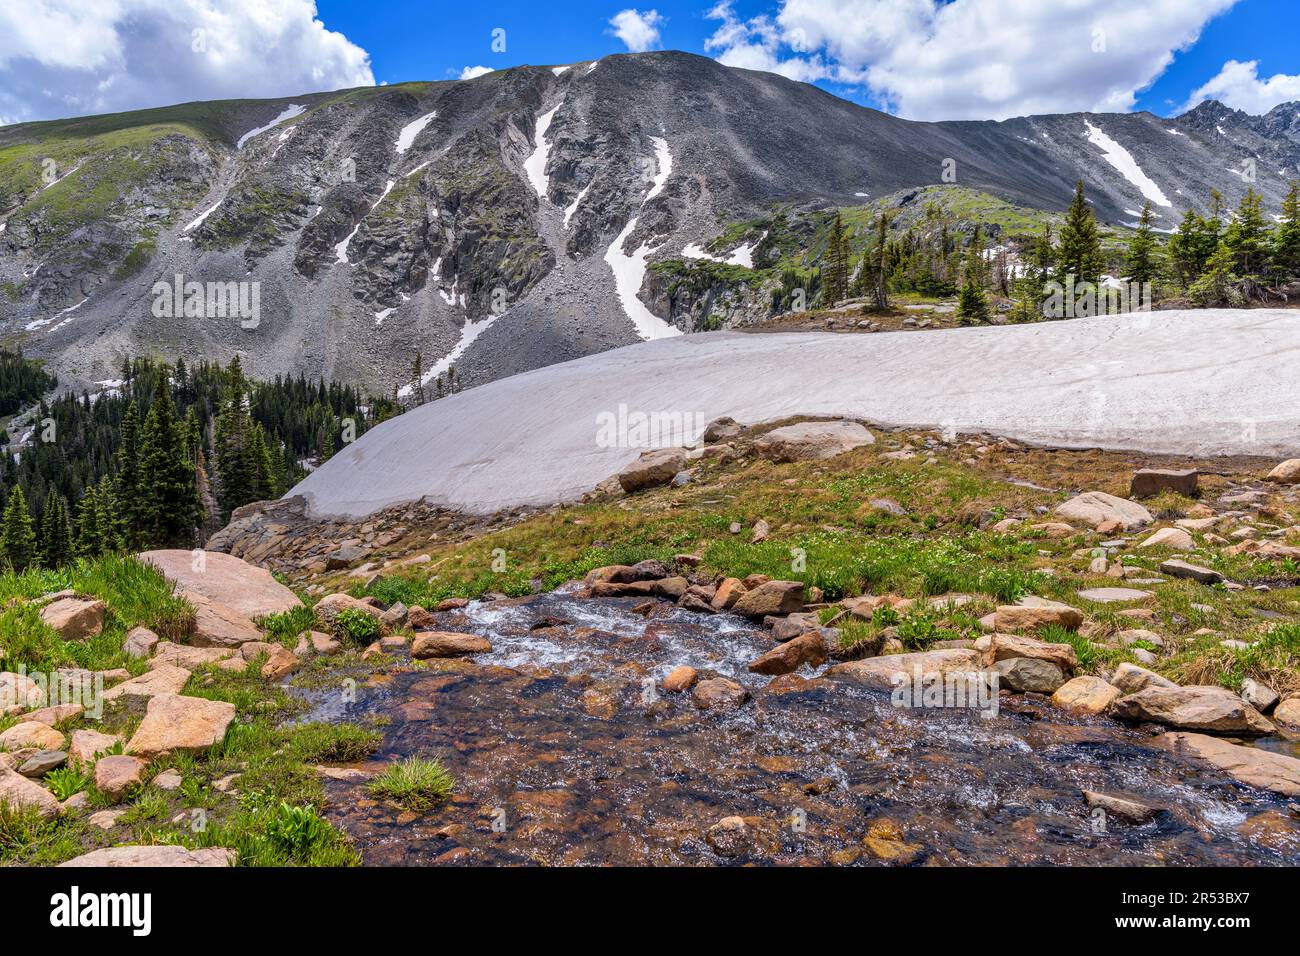 Spring Mountain Creek - A mountain creek running down from snow covered mountain top. Pawnee Pass Trail. Indian Peaks Wilderness, Colorado, USA. Stock Photo